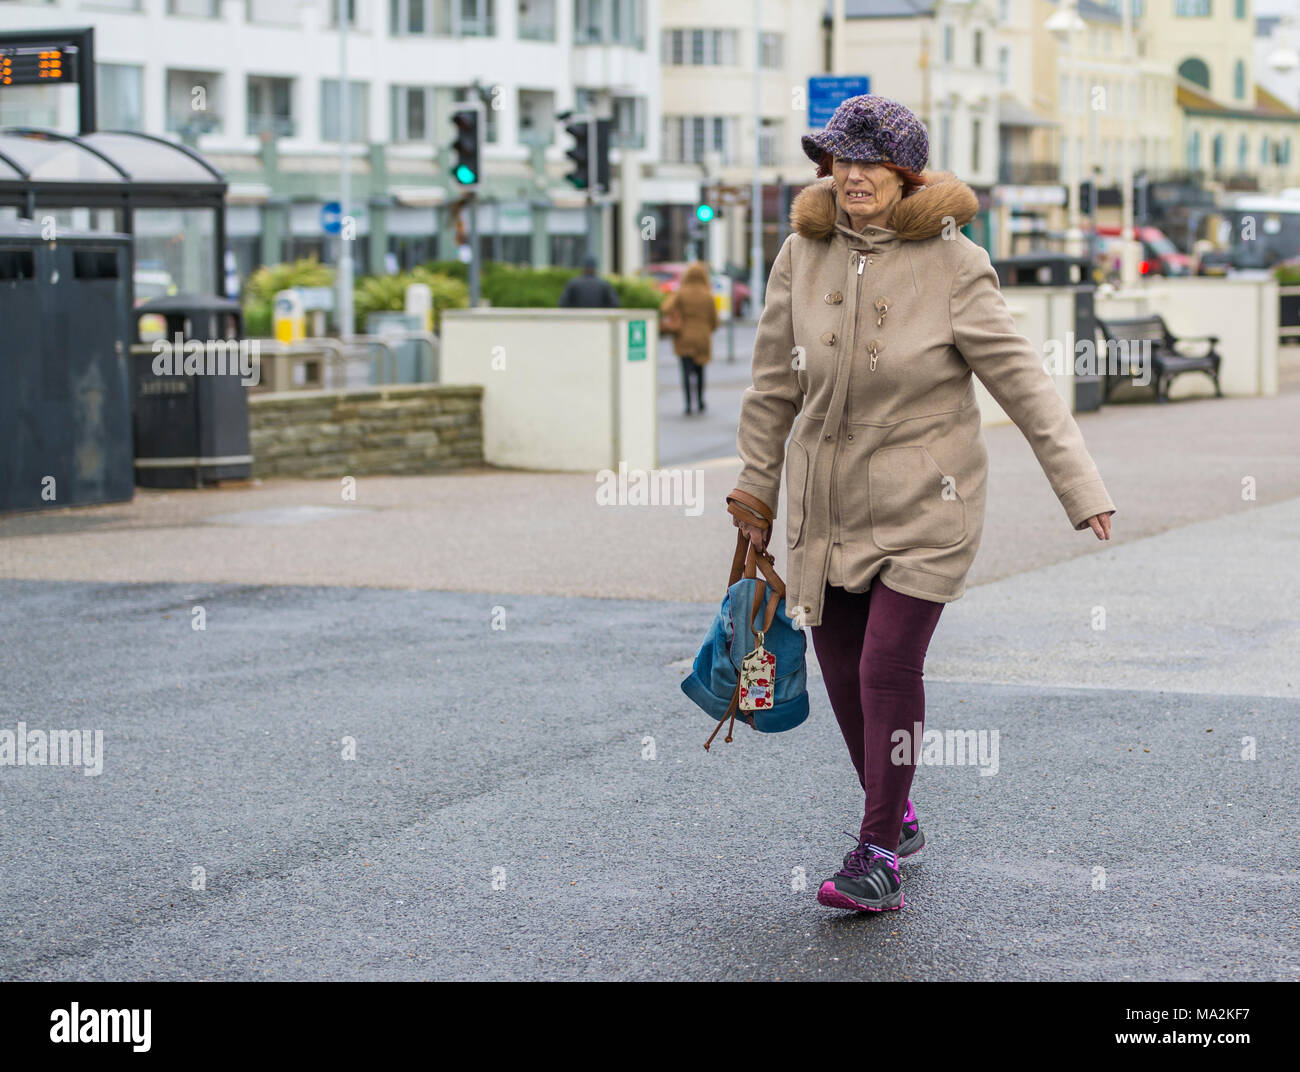 Active elderly lady dressed in a thick coat and hat carrying a bag walking fast in cold weather. Stock Photo